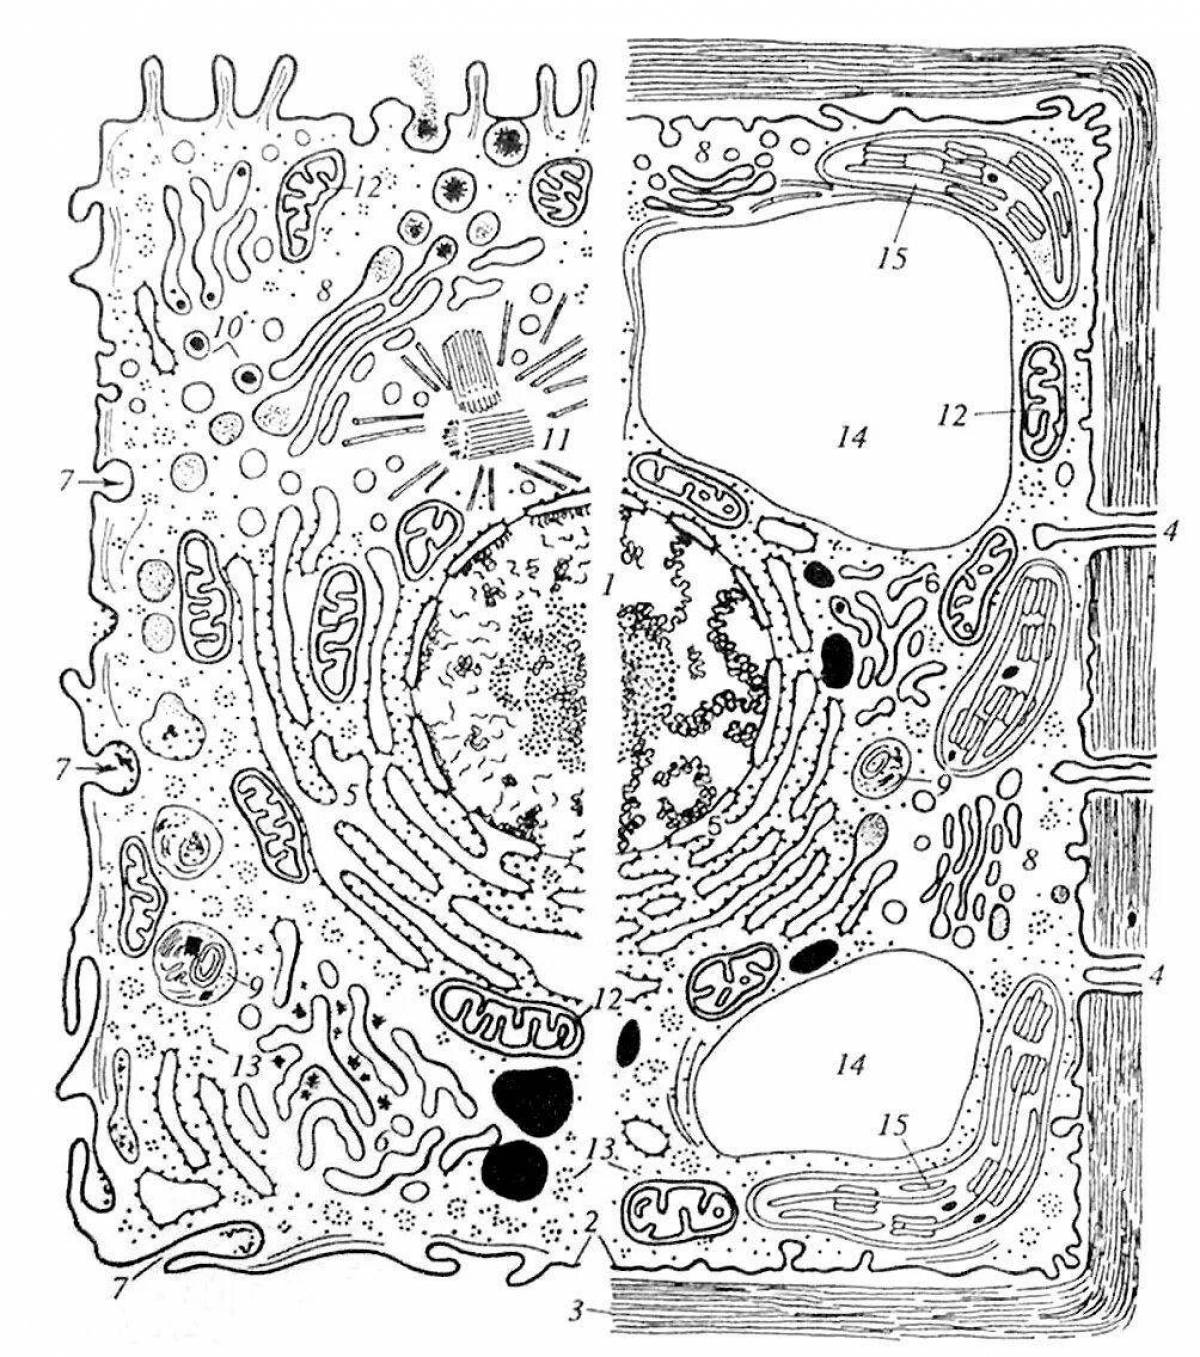 Coloring page of unique plant cell structure